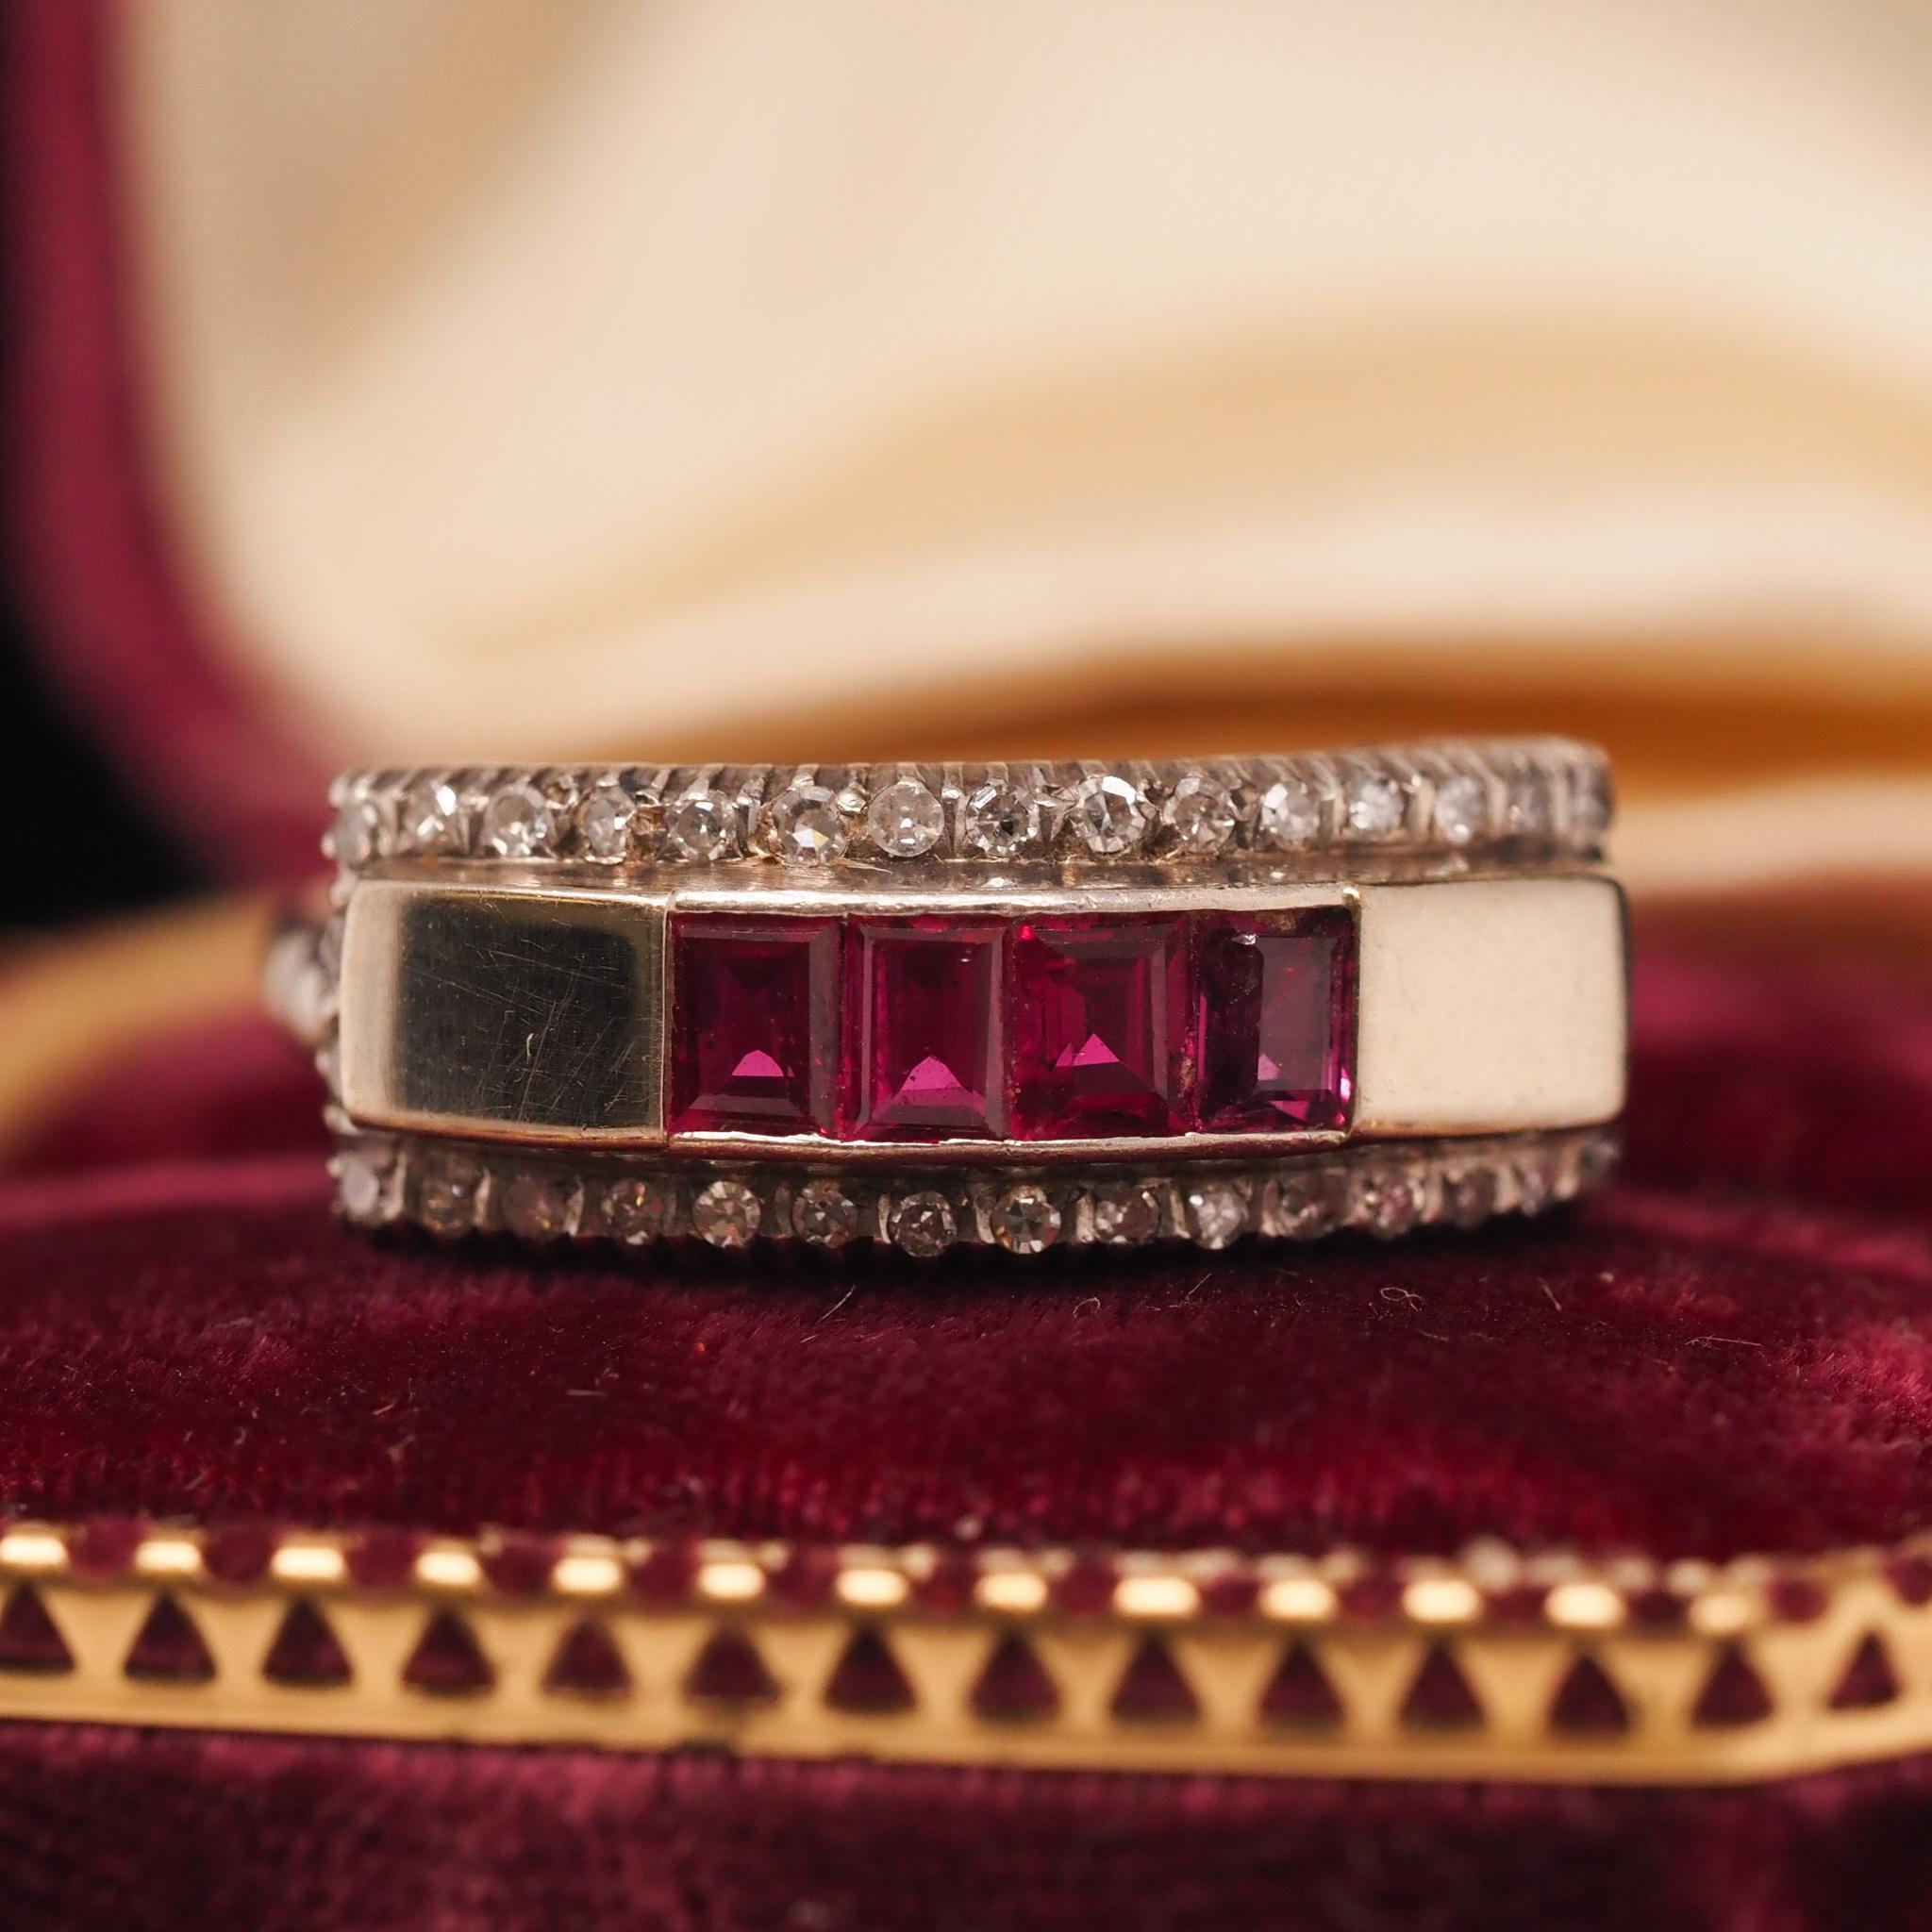 Year: 1950s
Item Details:
Ring Size: 7.5 (Sizable)
Metal Type: 18K White Gold [Hallmarked, and Tested]
Weight: 4.9grams
Ruby Details: Natural Rubies, .90ct total weight, Red color
Diamond Details: antique single cuts, F-G Color, VS Clarity
Band